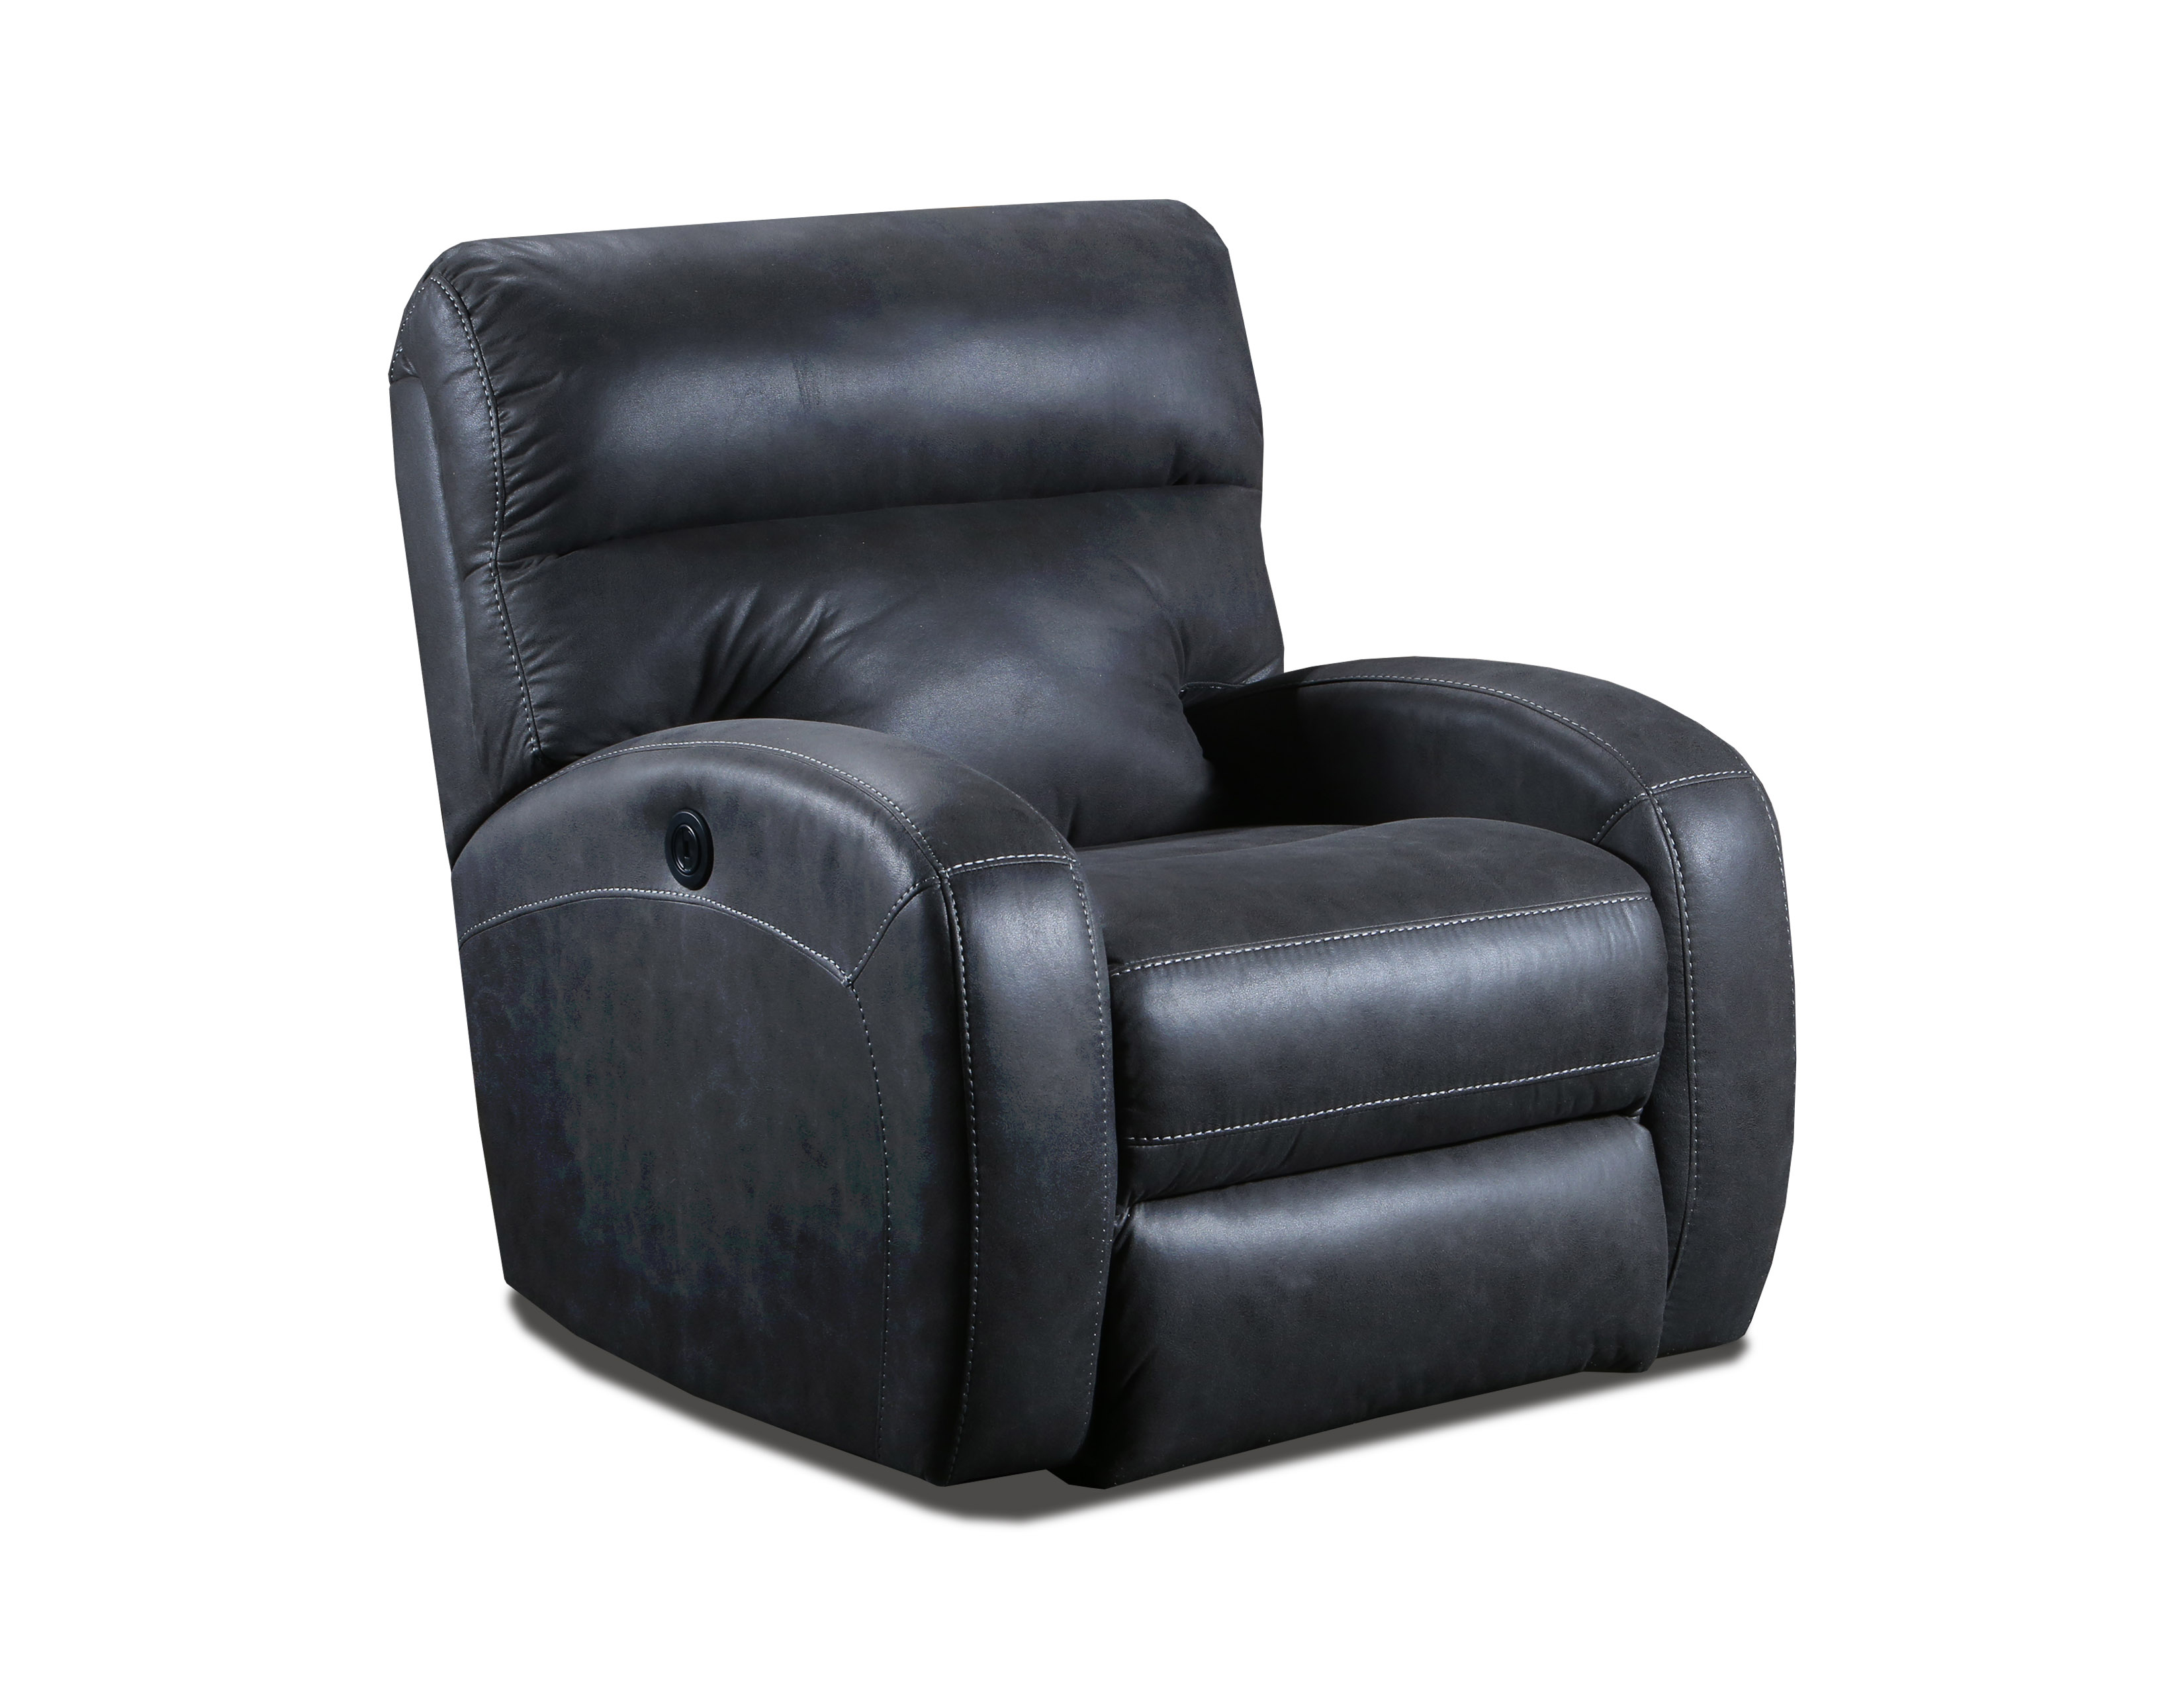 3010P Colby Power Swivel Glider Recliner Image